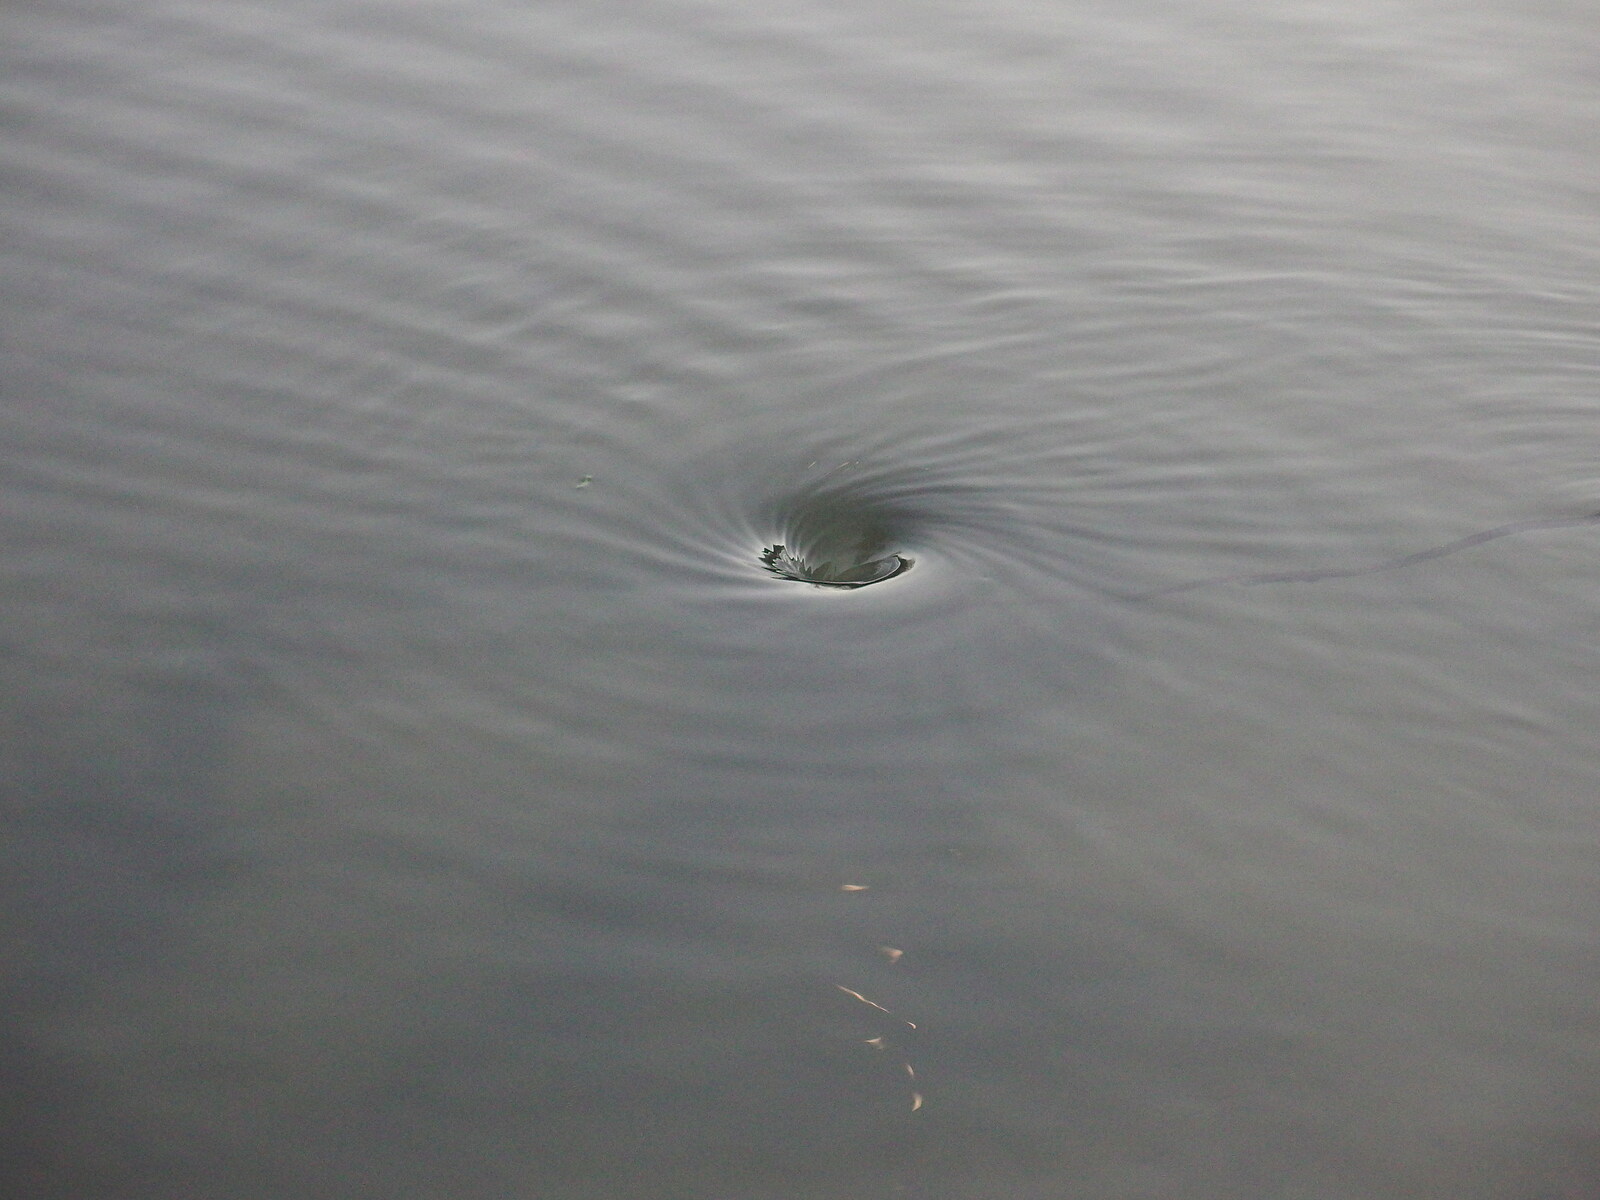 There's a small whirlpool in the pond from Dun Laoghaire and an Electrical Disaster, Monkstown, County Dublin, Ireland - 4th January 2014